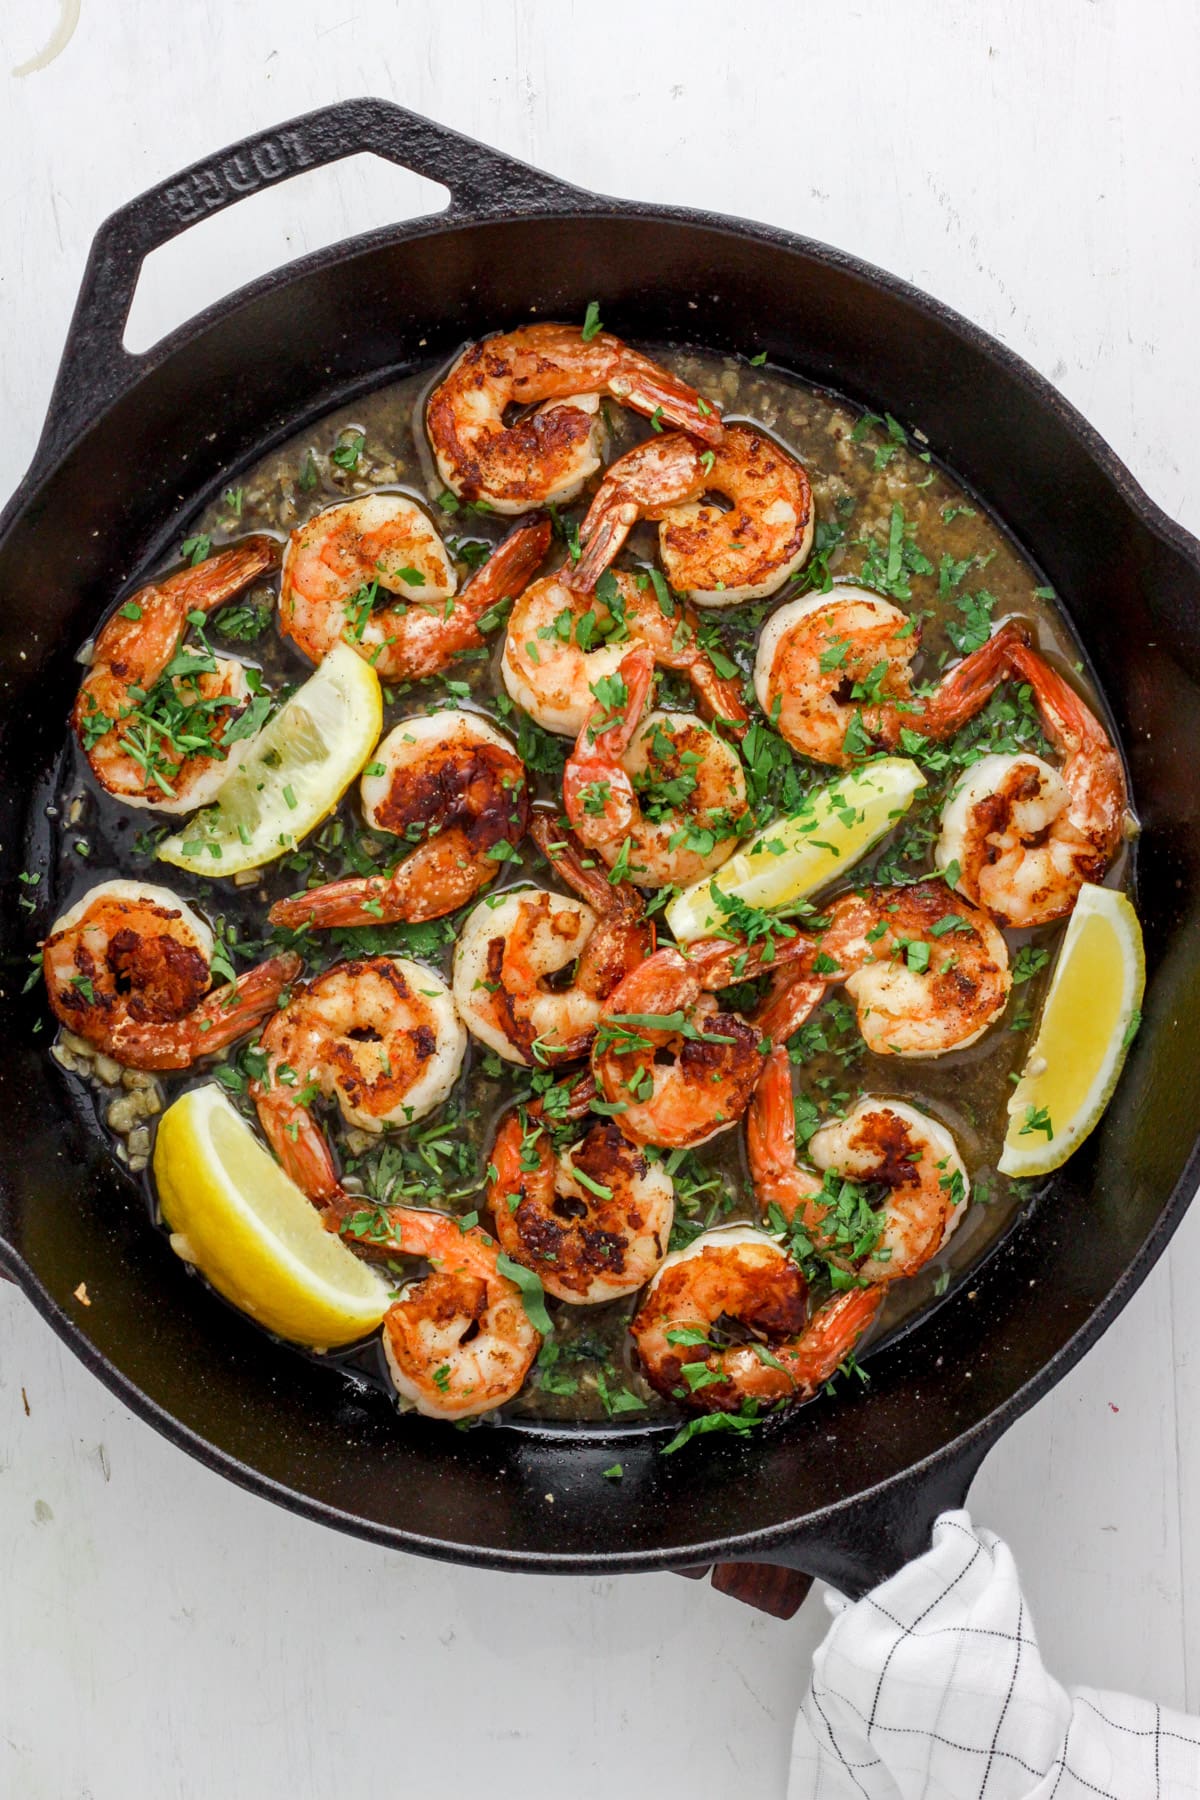 A cast iron skillet with seared shrimp in garlic and herb sauce topped with fresh herbs and lemon.